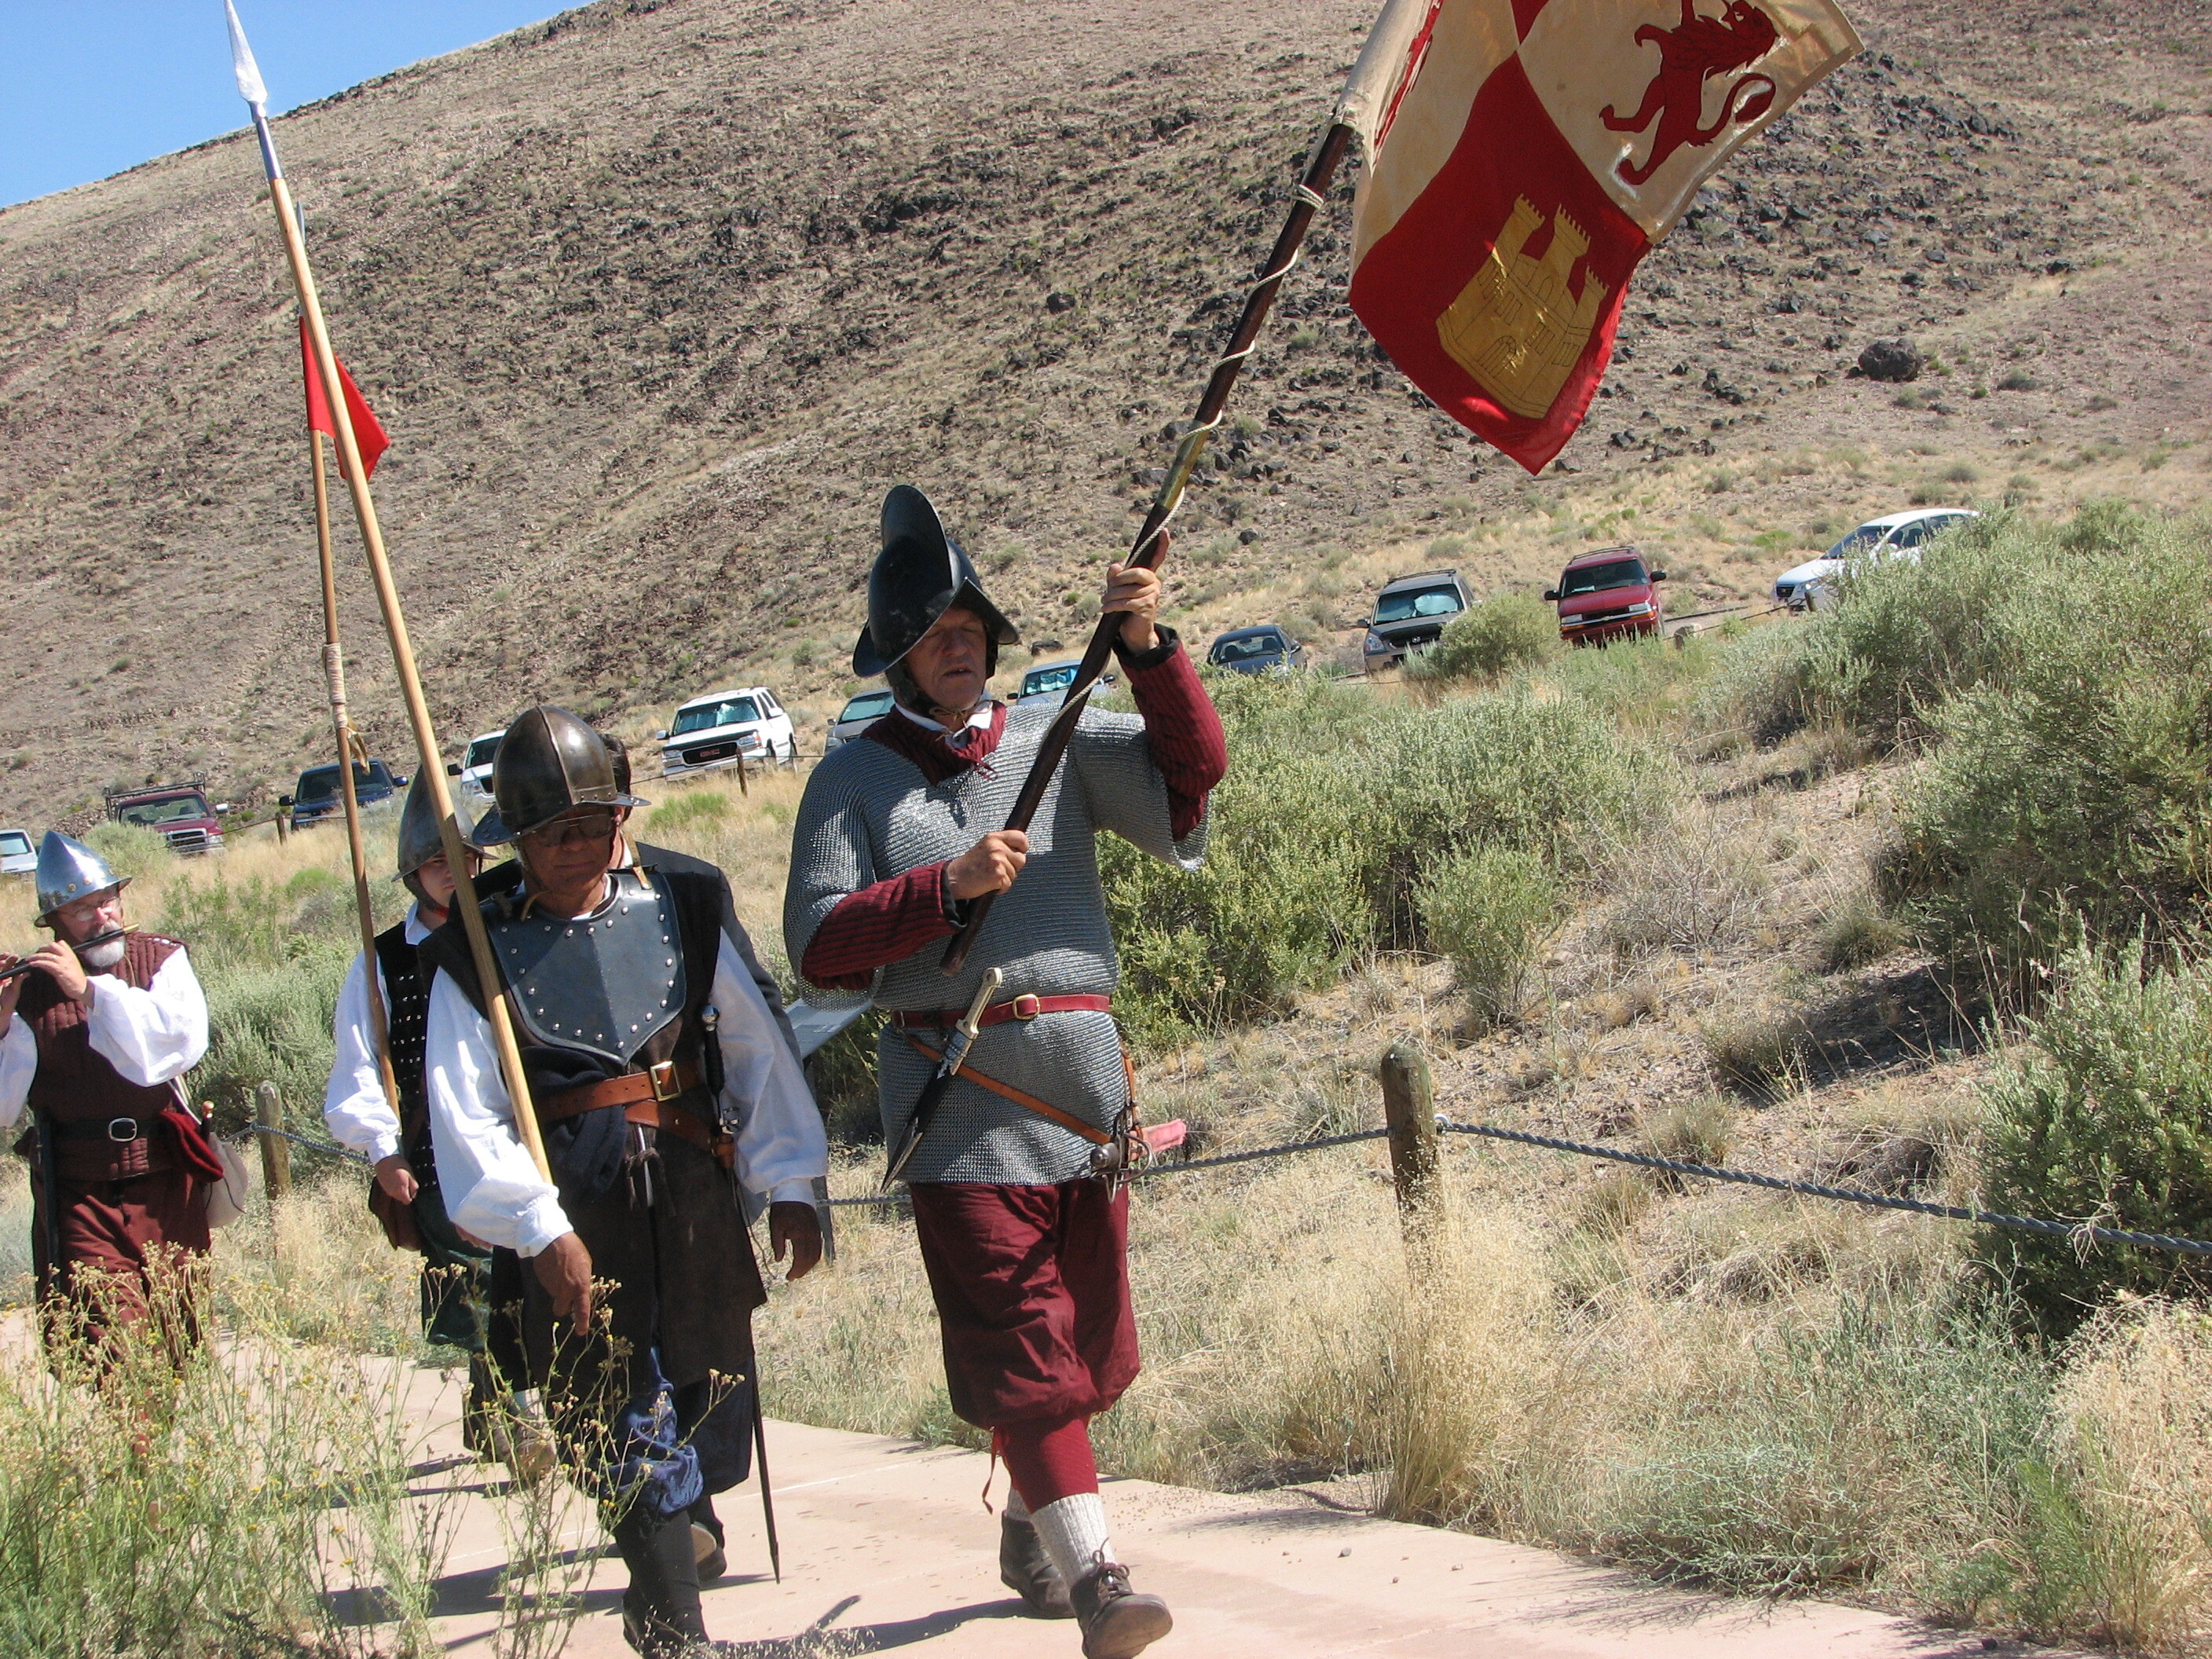 A reenactment procession enters the trail at Tome Hill in Valencia County, NM